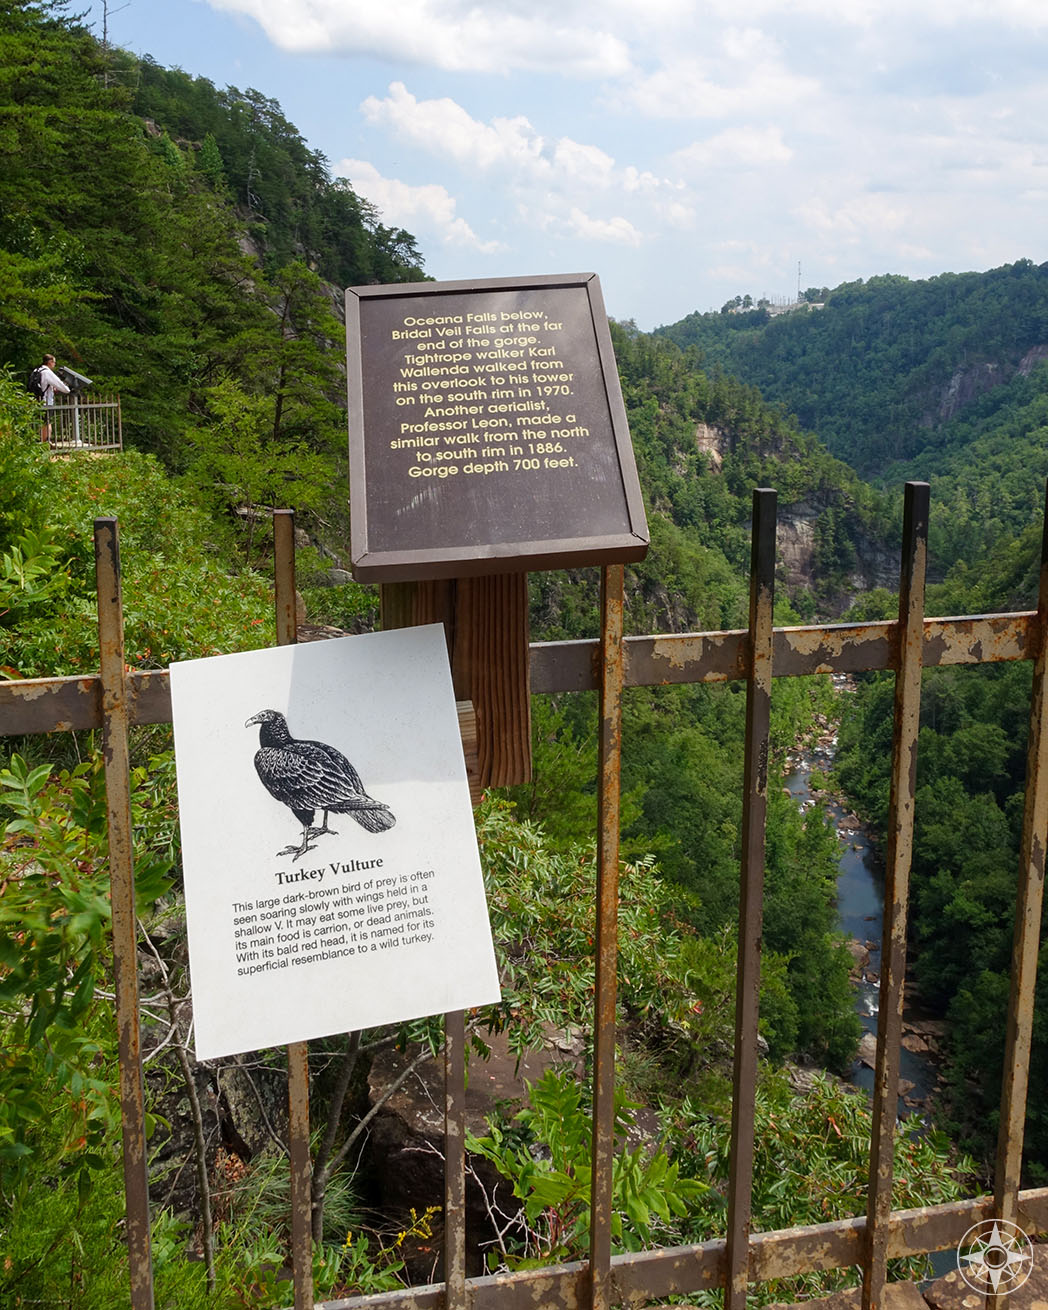 Informational signs can be found along the overlooks of the North Rim Trail, vulture, tightrope walker, waterfalls, Oceana Falls, Bridal Falls, Tallulah Falls 